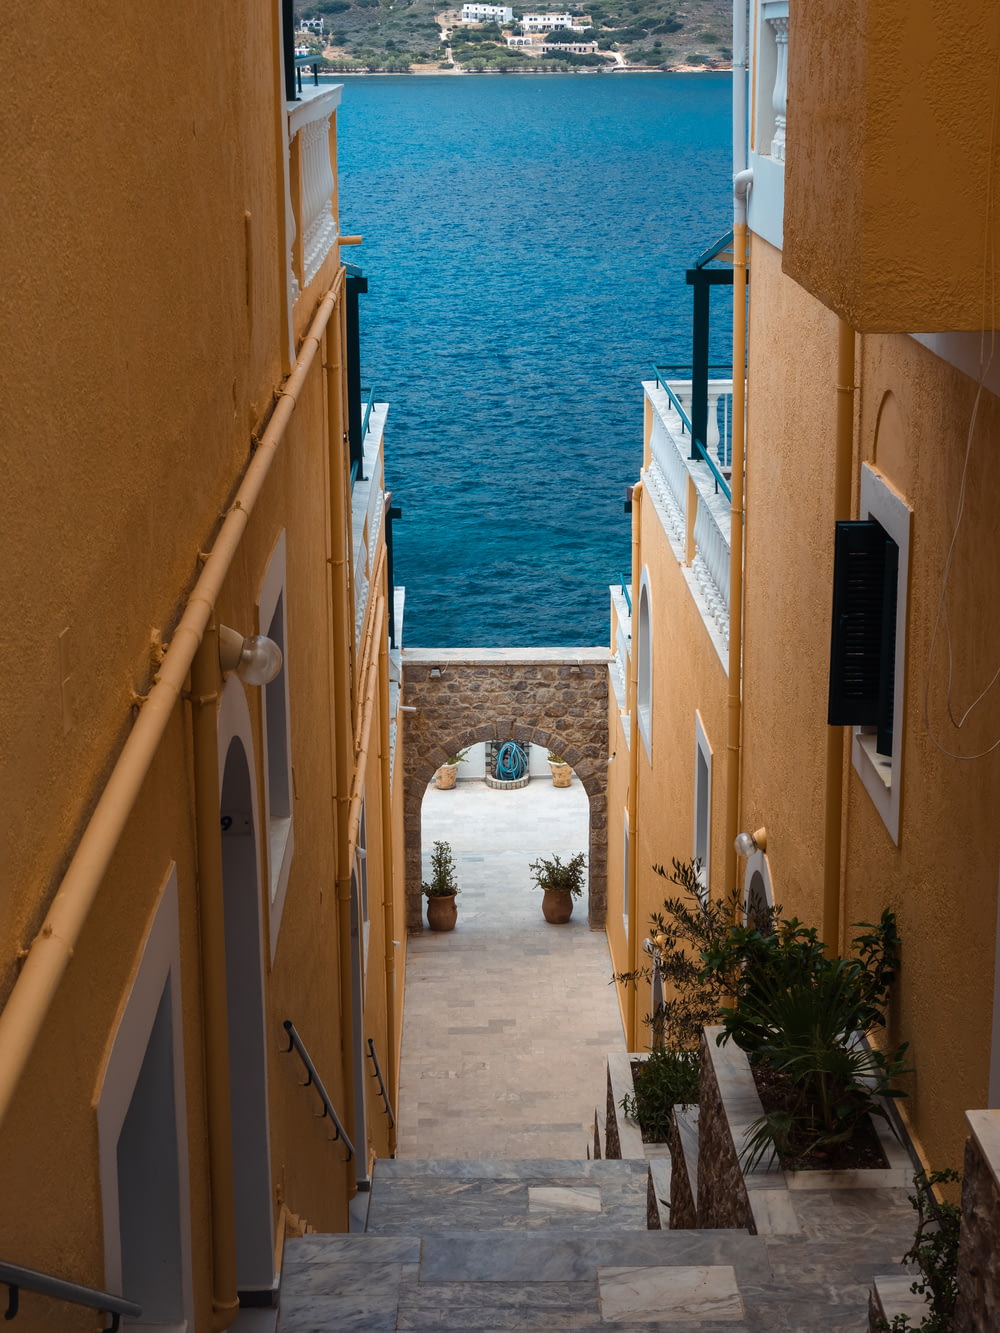 a narrow alley way leading to a body of water